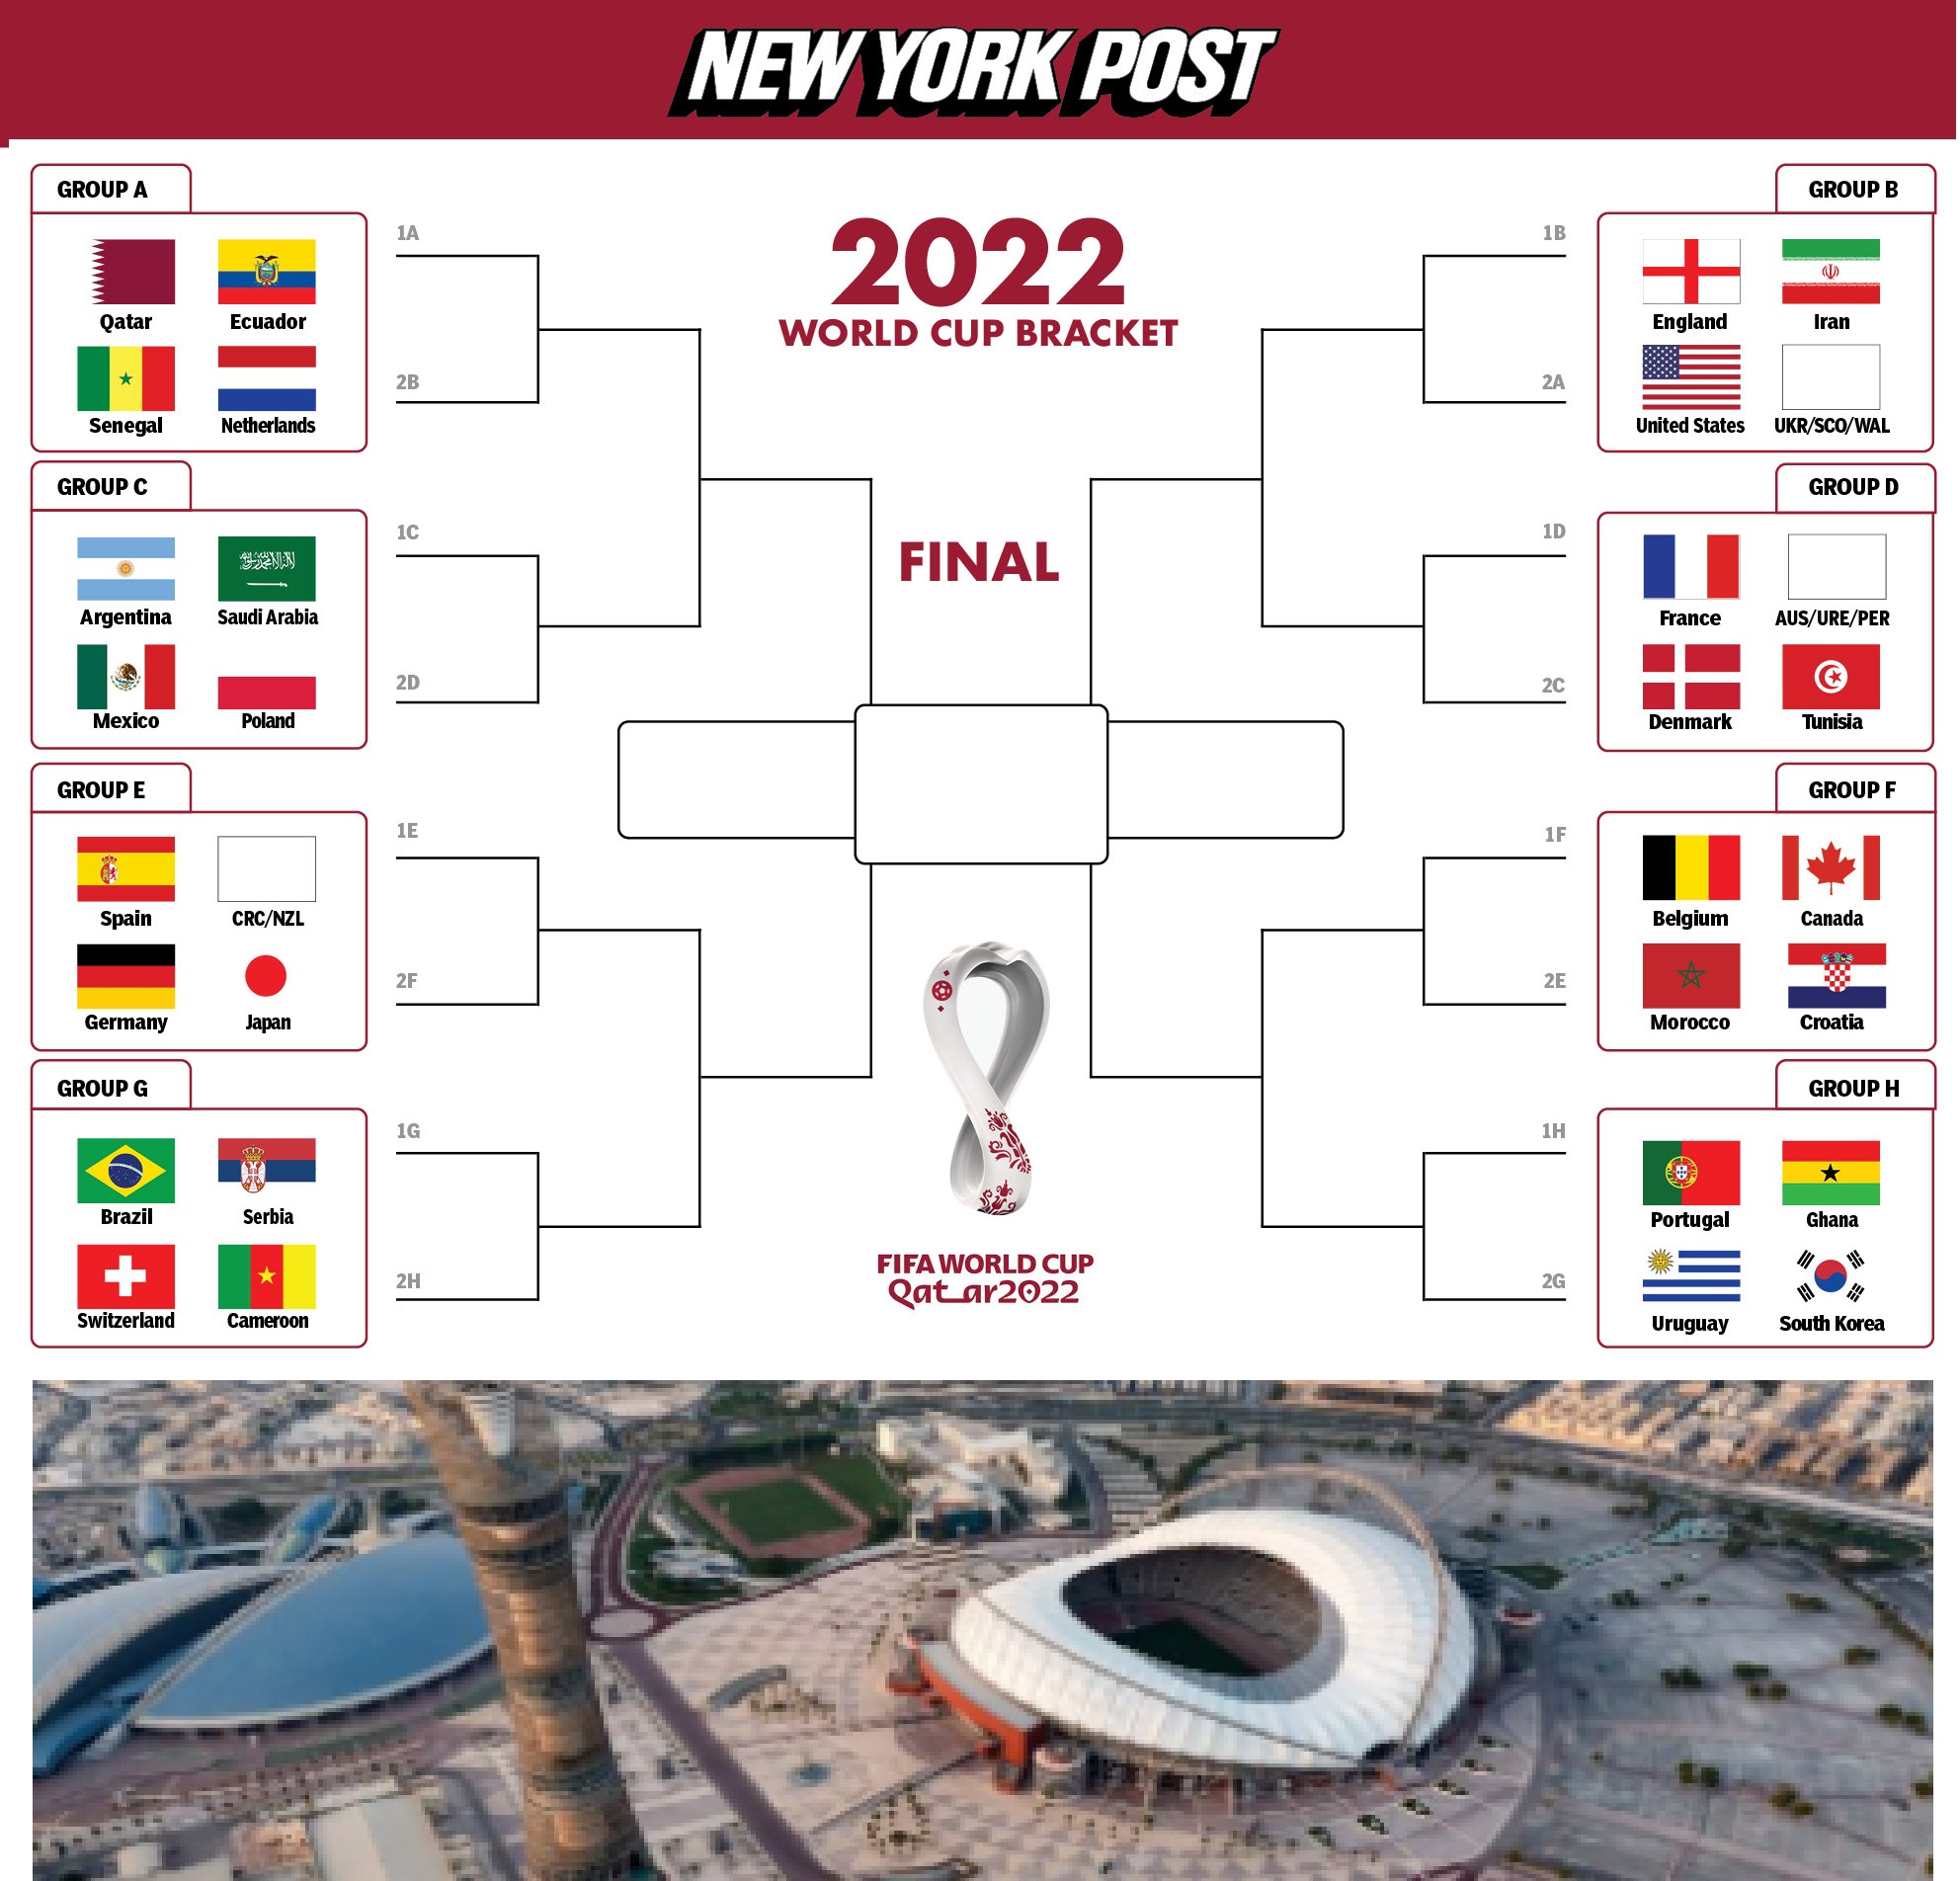 World Cup 2022 bracket and groups